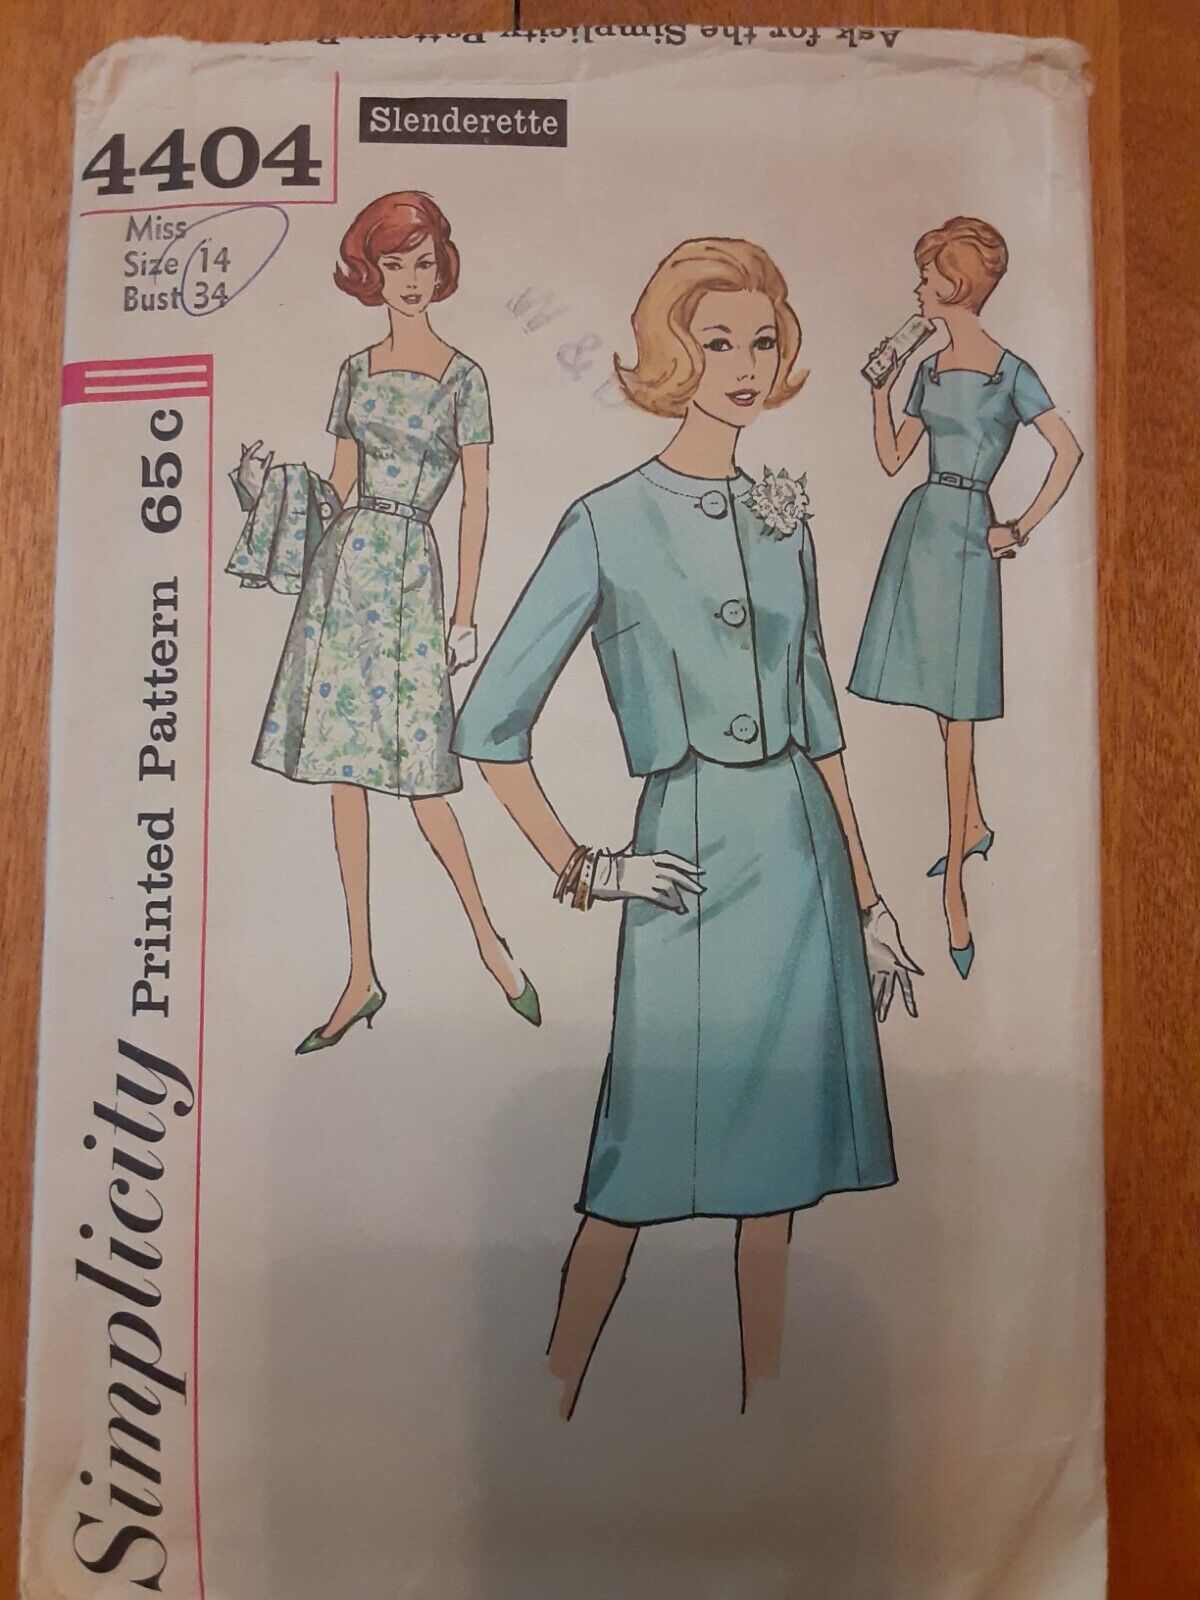 VTG Simplicity Pattern #4404 Miss Size 14 Bust 34 One-Piece Dress And Jacket